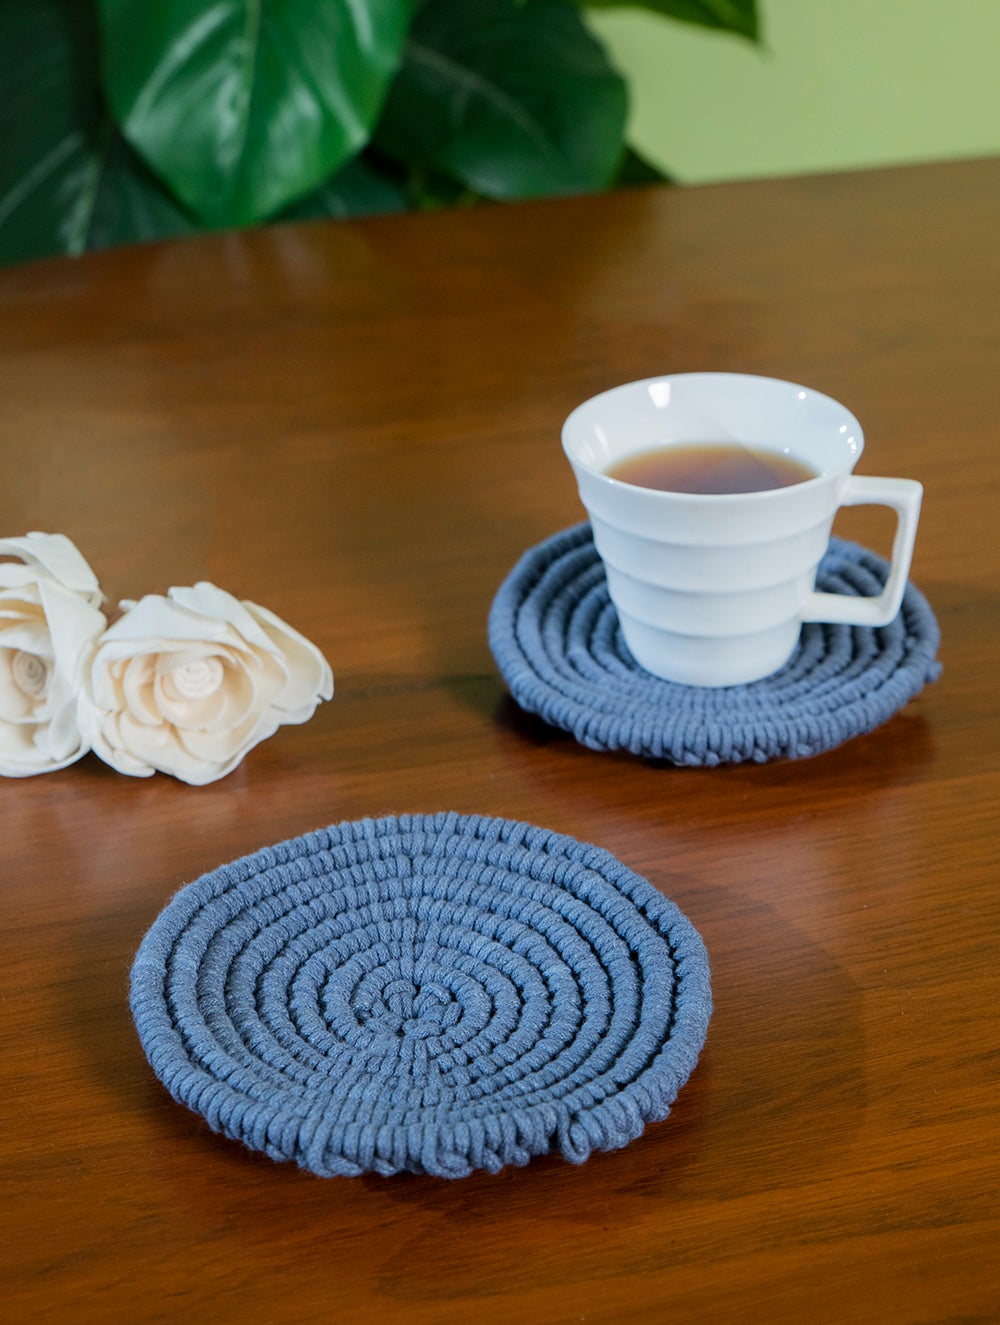 Load image into Gallery viewer, Classic Handknotted Macramé Coaster Sets / Trivets - Grey